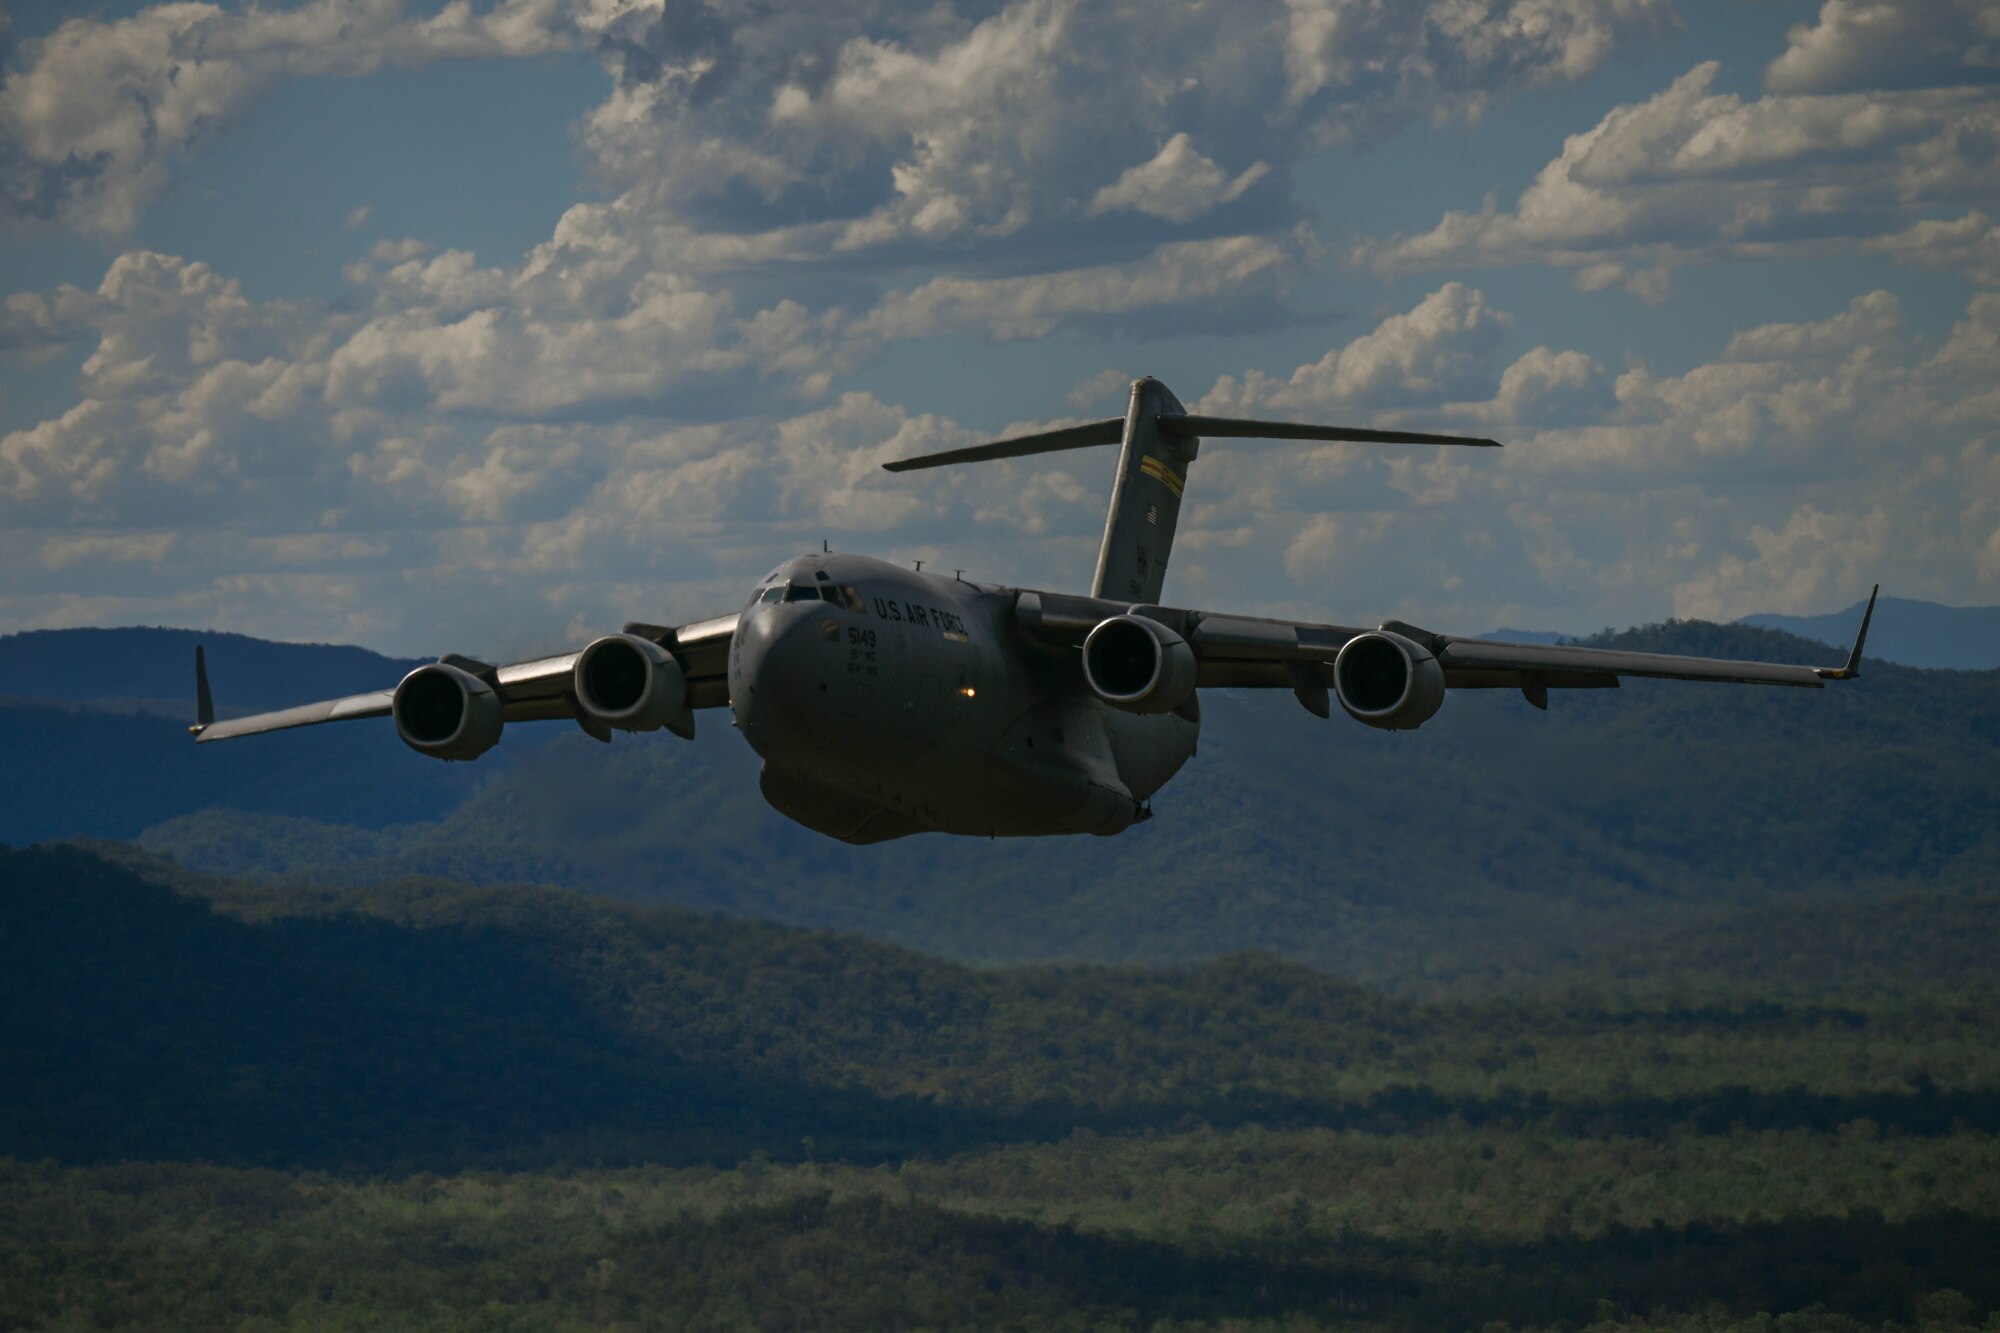 U.S. Air Force and Royal Australian Air Force C-17 Globemaster IIIs fly in a three-ship formation during Exercise Global Dexterity 23-2 while performing a training flight around the skies of Australia, Nov. 28, 2023. The exercise represents the key partnership between the U.S. and Australia that allows continued security and stability in the Indo-Pacific region.(U.S. Air Force photo by Senior Airman Makensie Cooper)